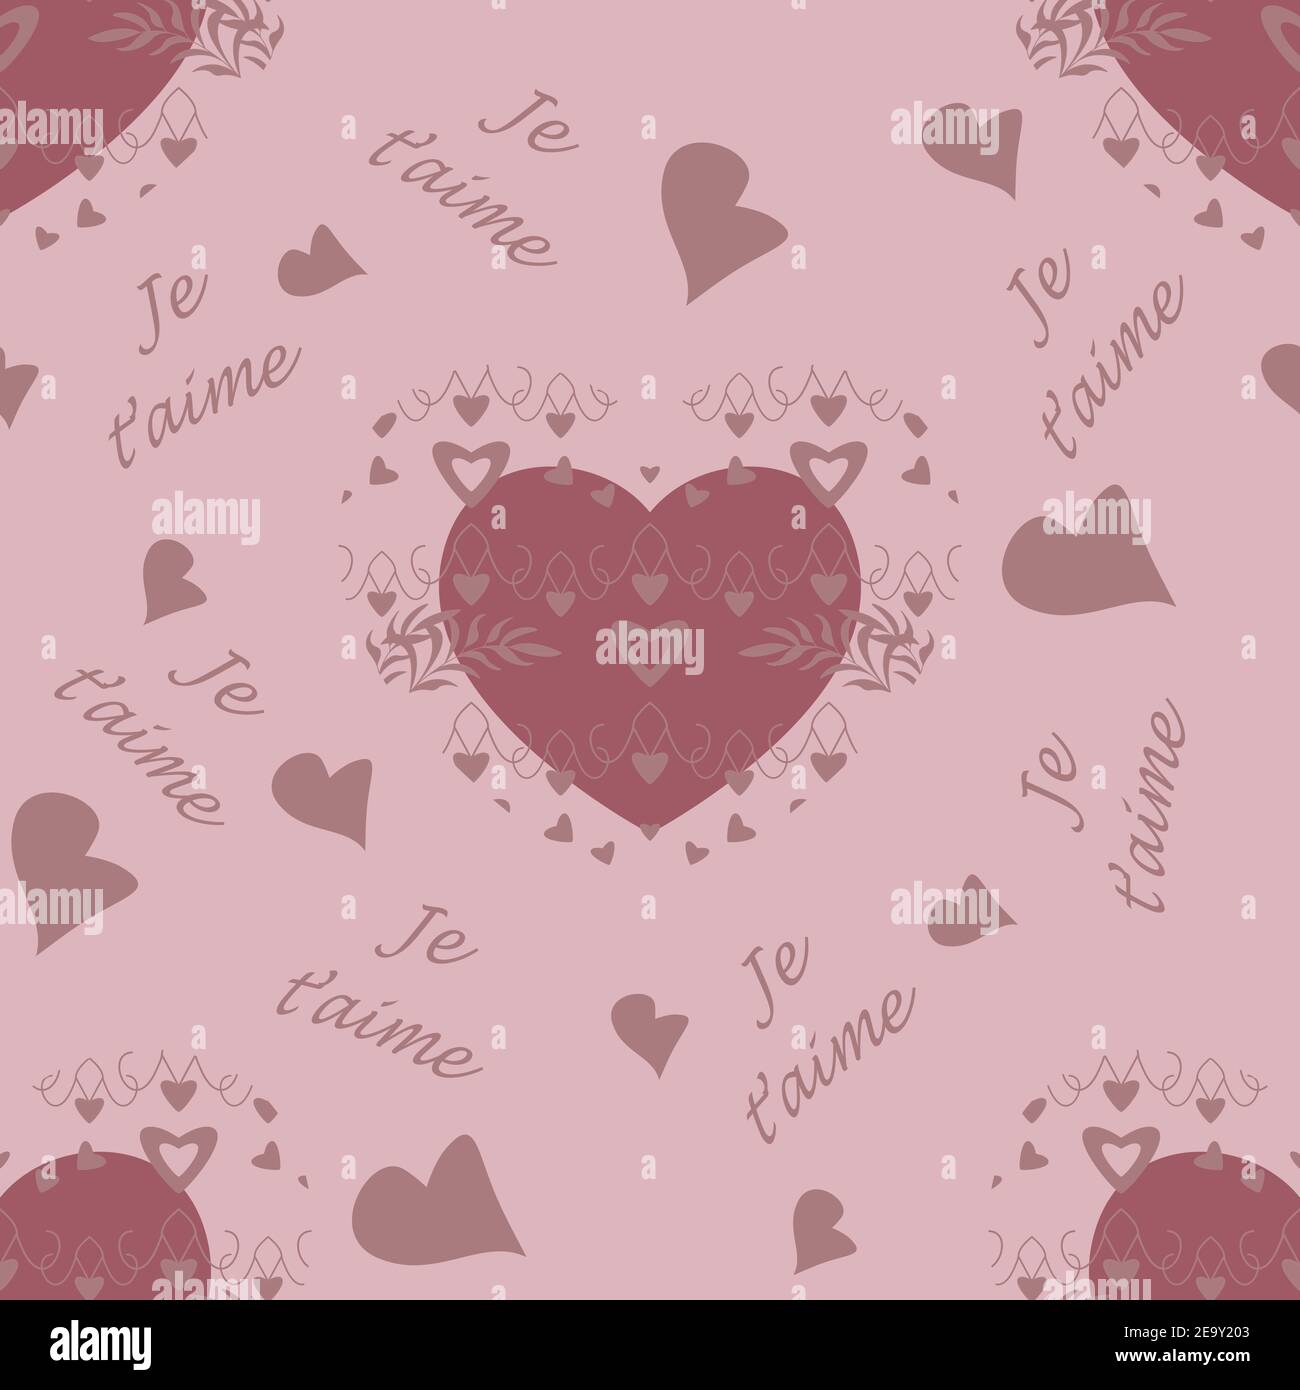 https://c8.alamy.com/comp/2E9Y203/seamless-pattern-for-valentines-day-declaration-of-love-with-little-hearts-and-text-in-french-language-i-love-you-light-pink-color-vector-2E9Y203.jpg